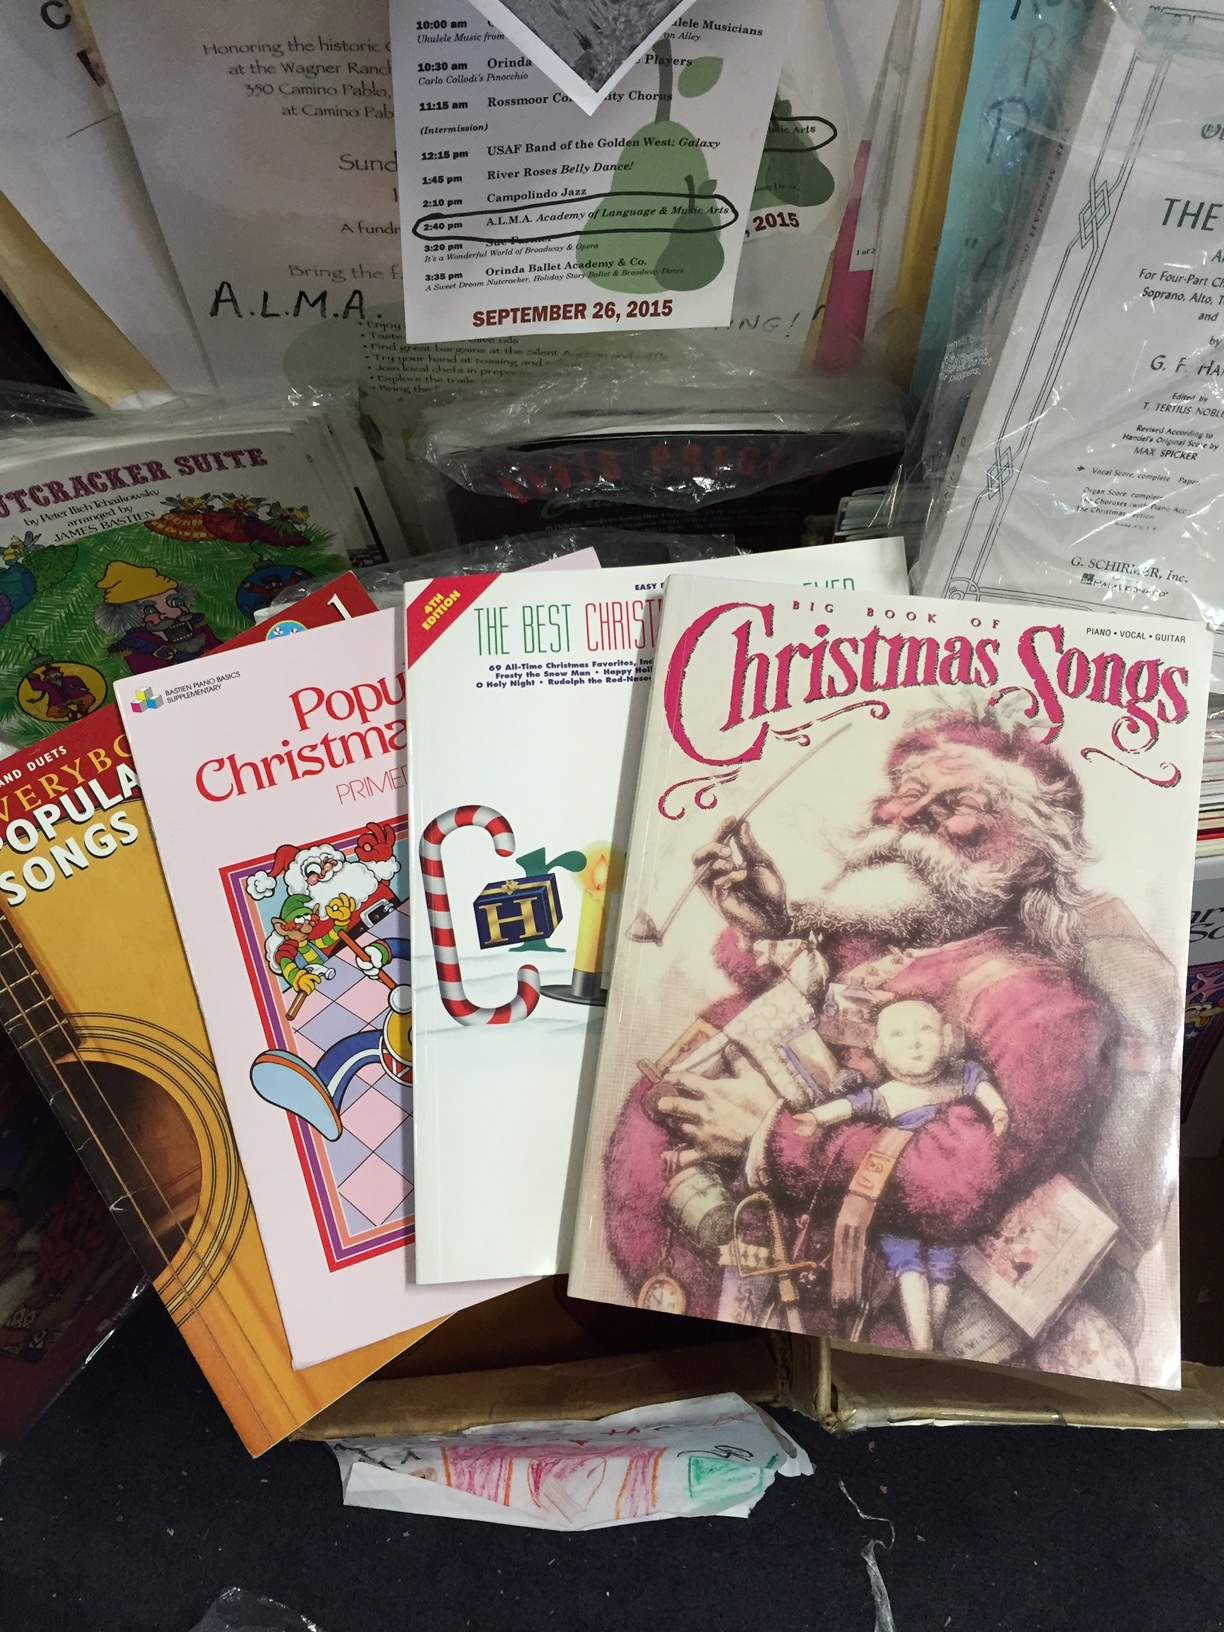 For the Carolers : Stock up on classic holiday sheet music for piano, vocal and guitar. We hope you’ll knock on our door and serenade us with your holiday spirit.